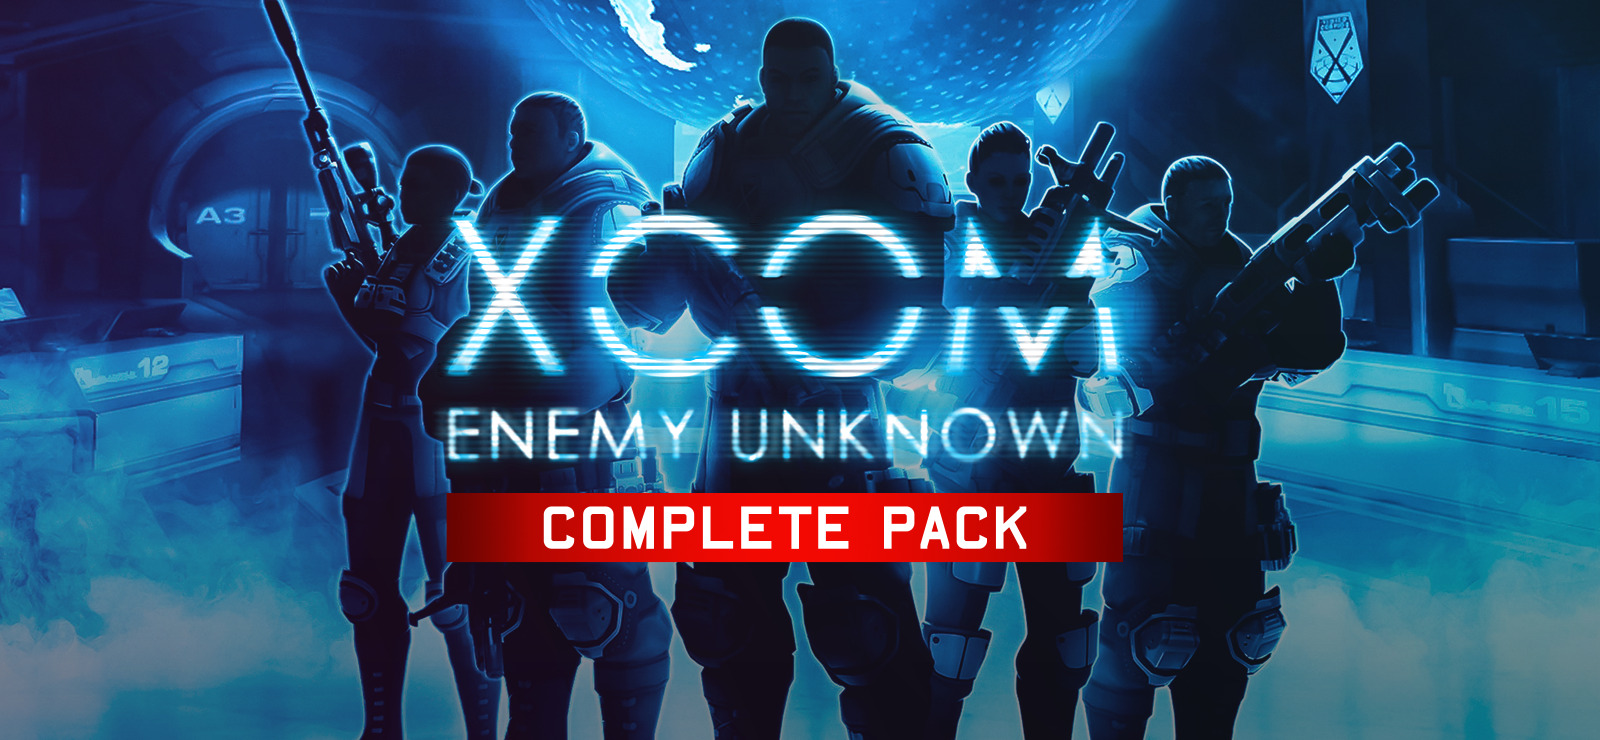 xcom enemy unknown or enemy within